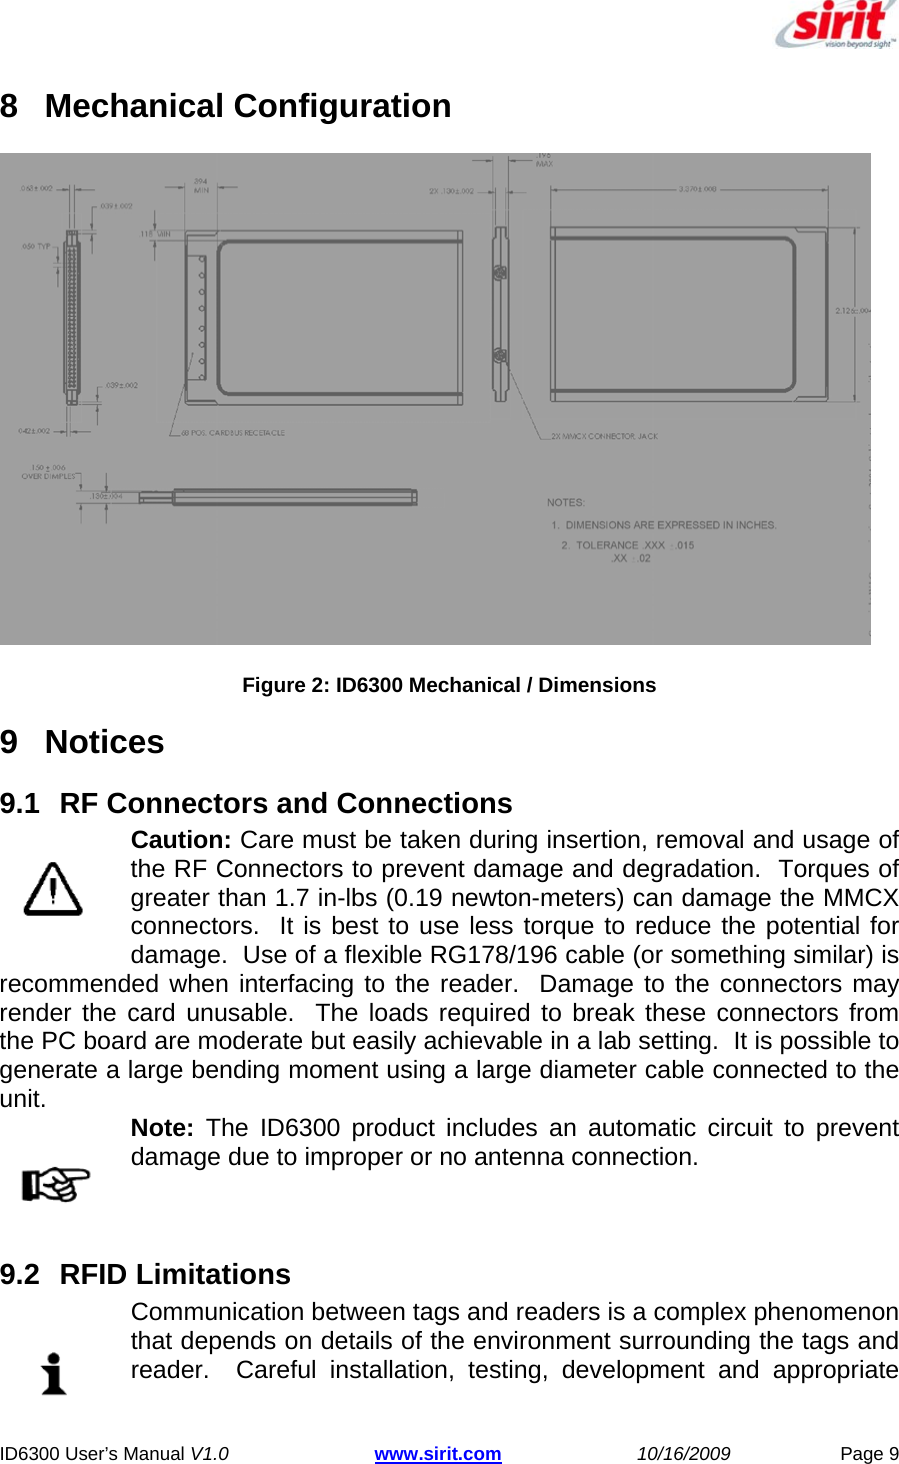  ID6300 User’s Manual V1.0 www.sirit.com 10/16/2009 Page 9  8 Mechanical Configuration  Figure 2: ID6300 Mechanical / Dimensions 9 Notices  9.1  RF Connectors and Connections Caution: Care must be taken during insertion, removal and usage of the RF Connectors to prevent damage and degradation.  Torques of greater than 1.7 in-lbs (0.19 newton-meters) can damage the MMCX connectors.  It is best to use less torque to reduce the potential for damage.  Use of a flexible RG178/196 cable (or something similar) is recommended when interfacing to the reader.  Damage to the connectors may render the card unusable.  The loads required to break these connectors from the PC board are moderate but easily achievable in a lab setting.  It is possible to generate a large bending moment using a large diameter cable connected to the unit.   Note: The ID6300 product includes an automatic circuit to prevent damage due to improper or no antenna connection.  9.2 RFID Limitations Communication between tags and readers is a complex phenomenon that depends on details of the environment surrounding the tags and reader.  Careful installation, testing, development and appropriate 